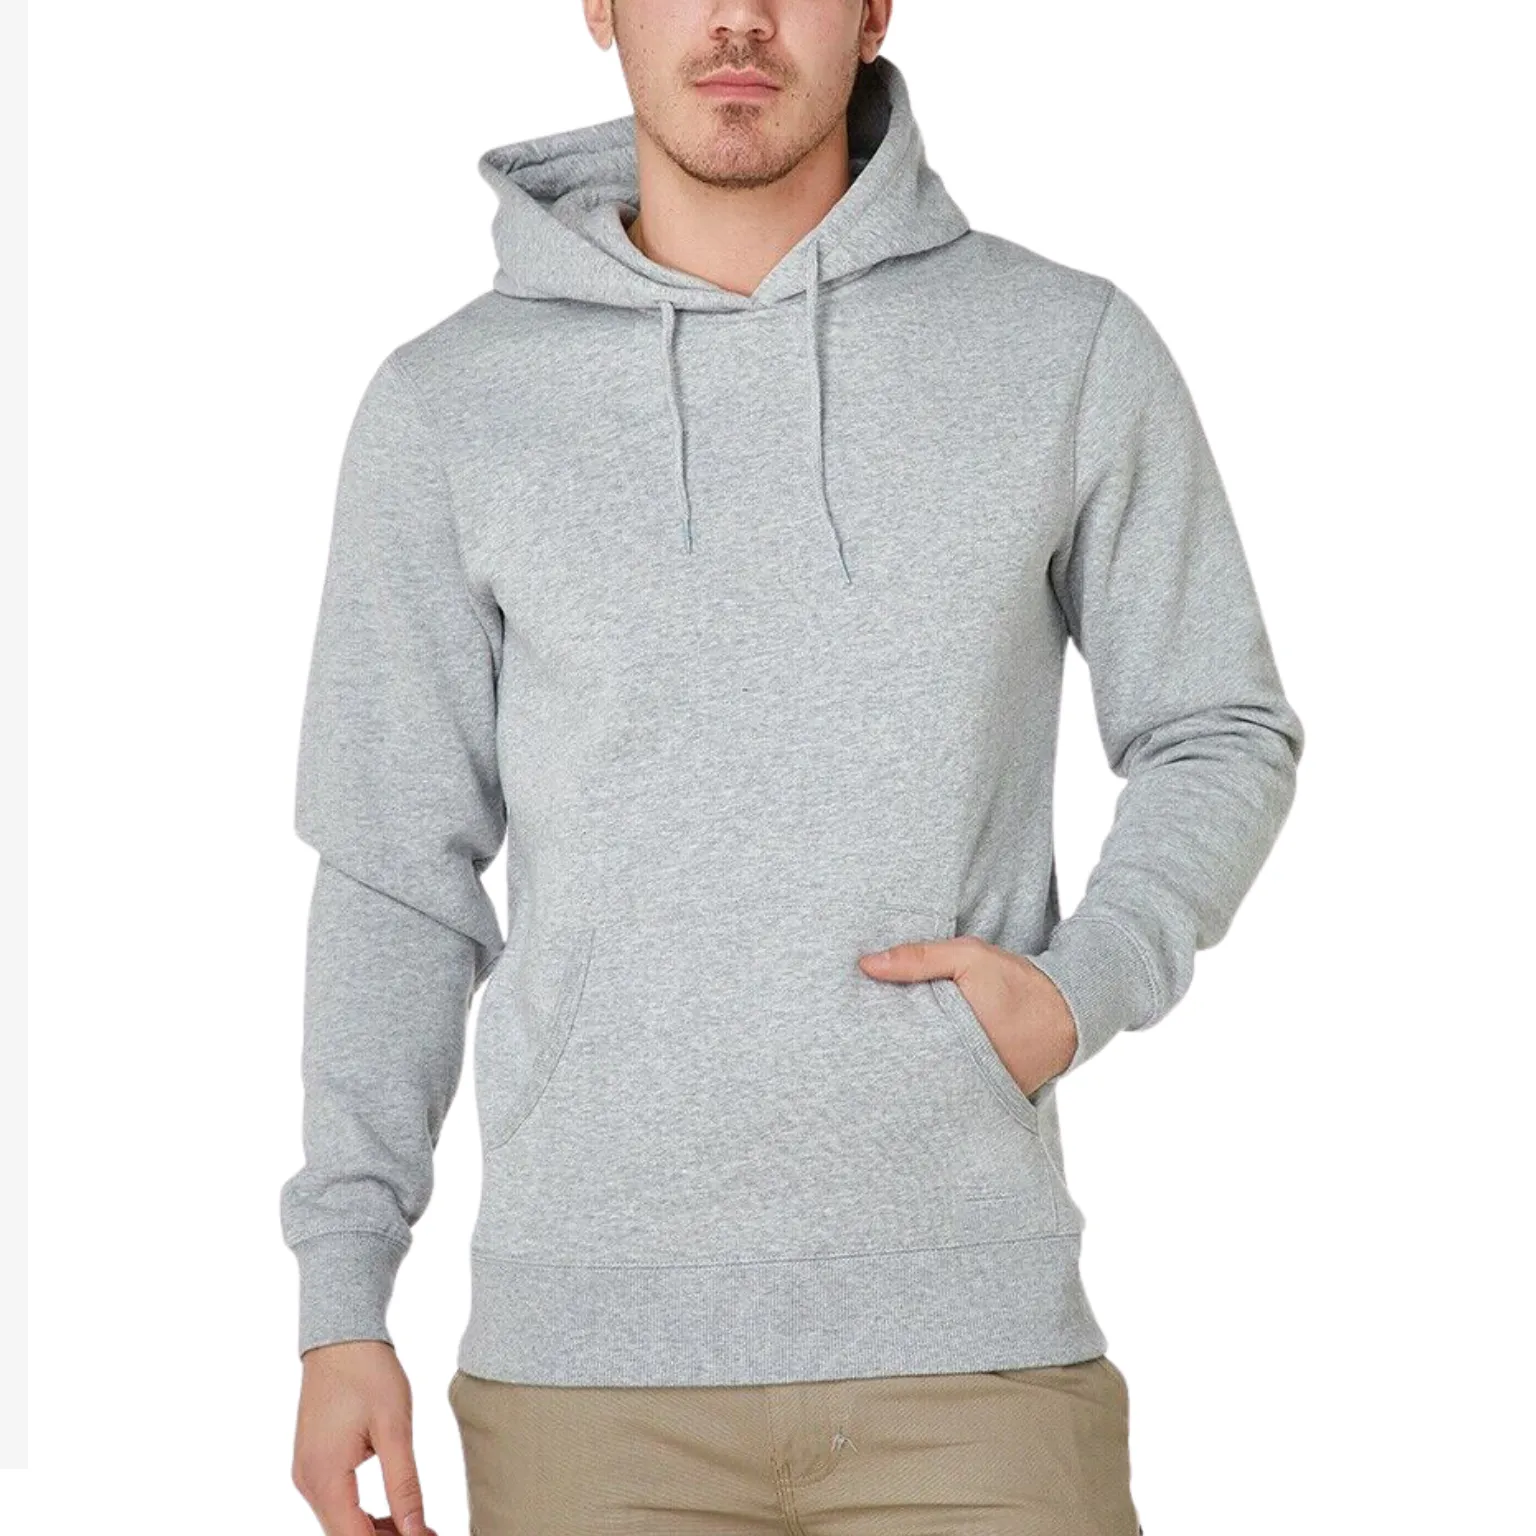 Cotton Hoodie manufacturing with superior quality